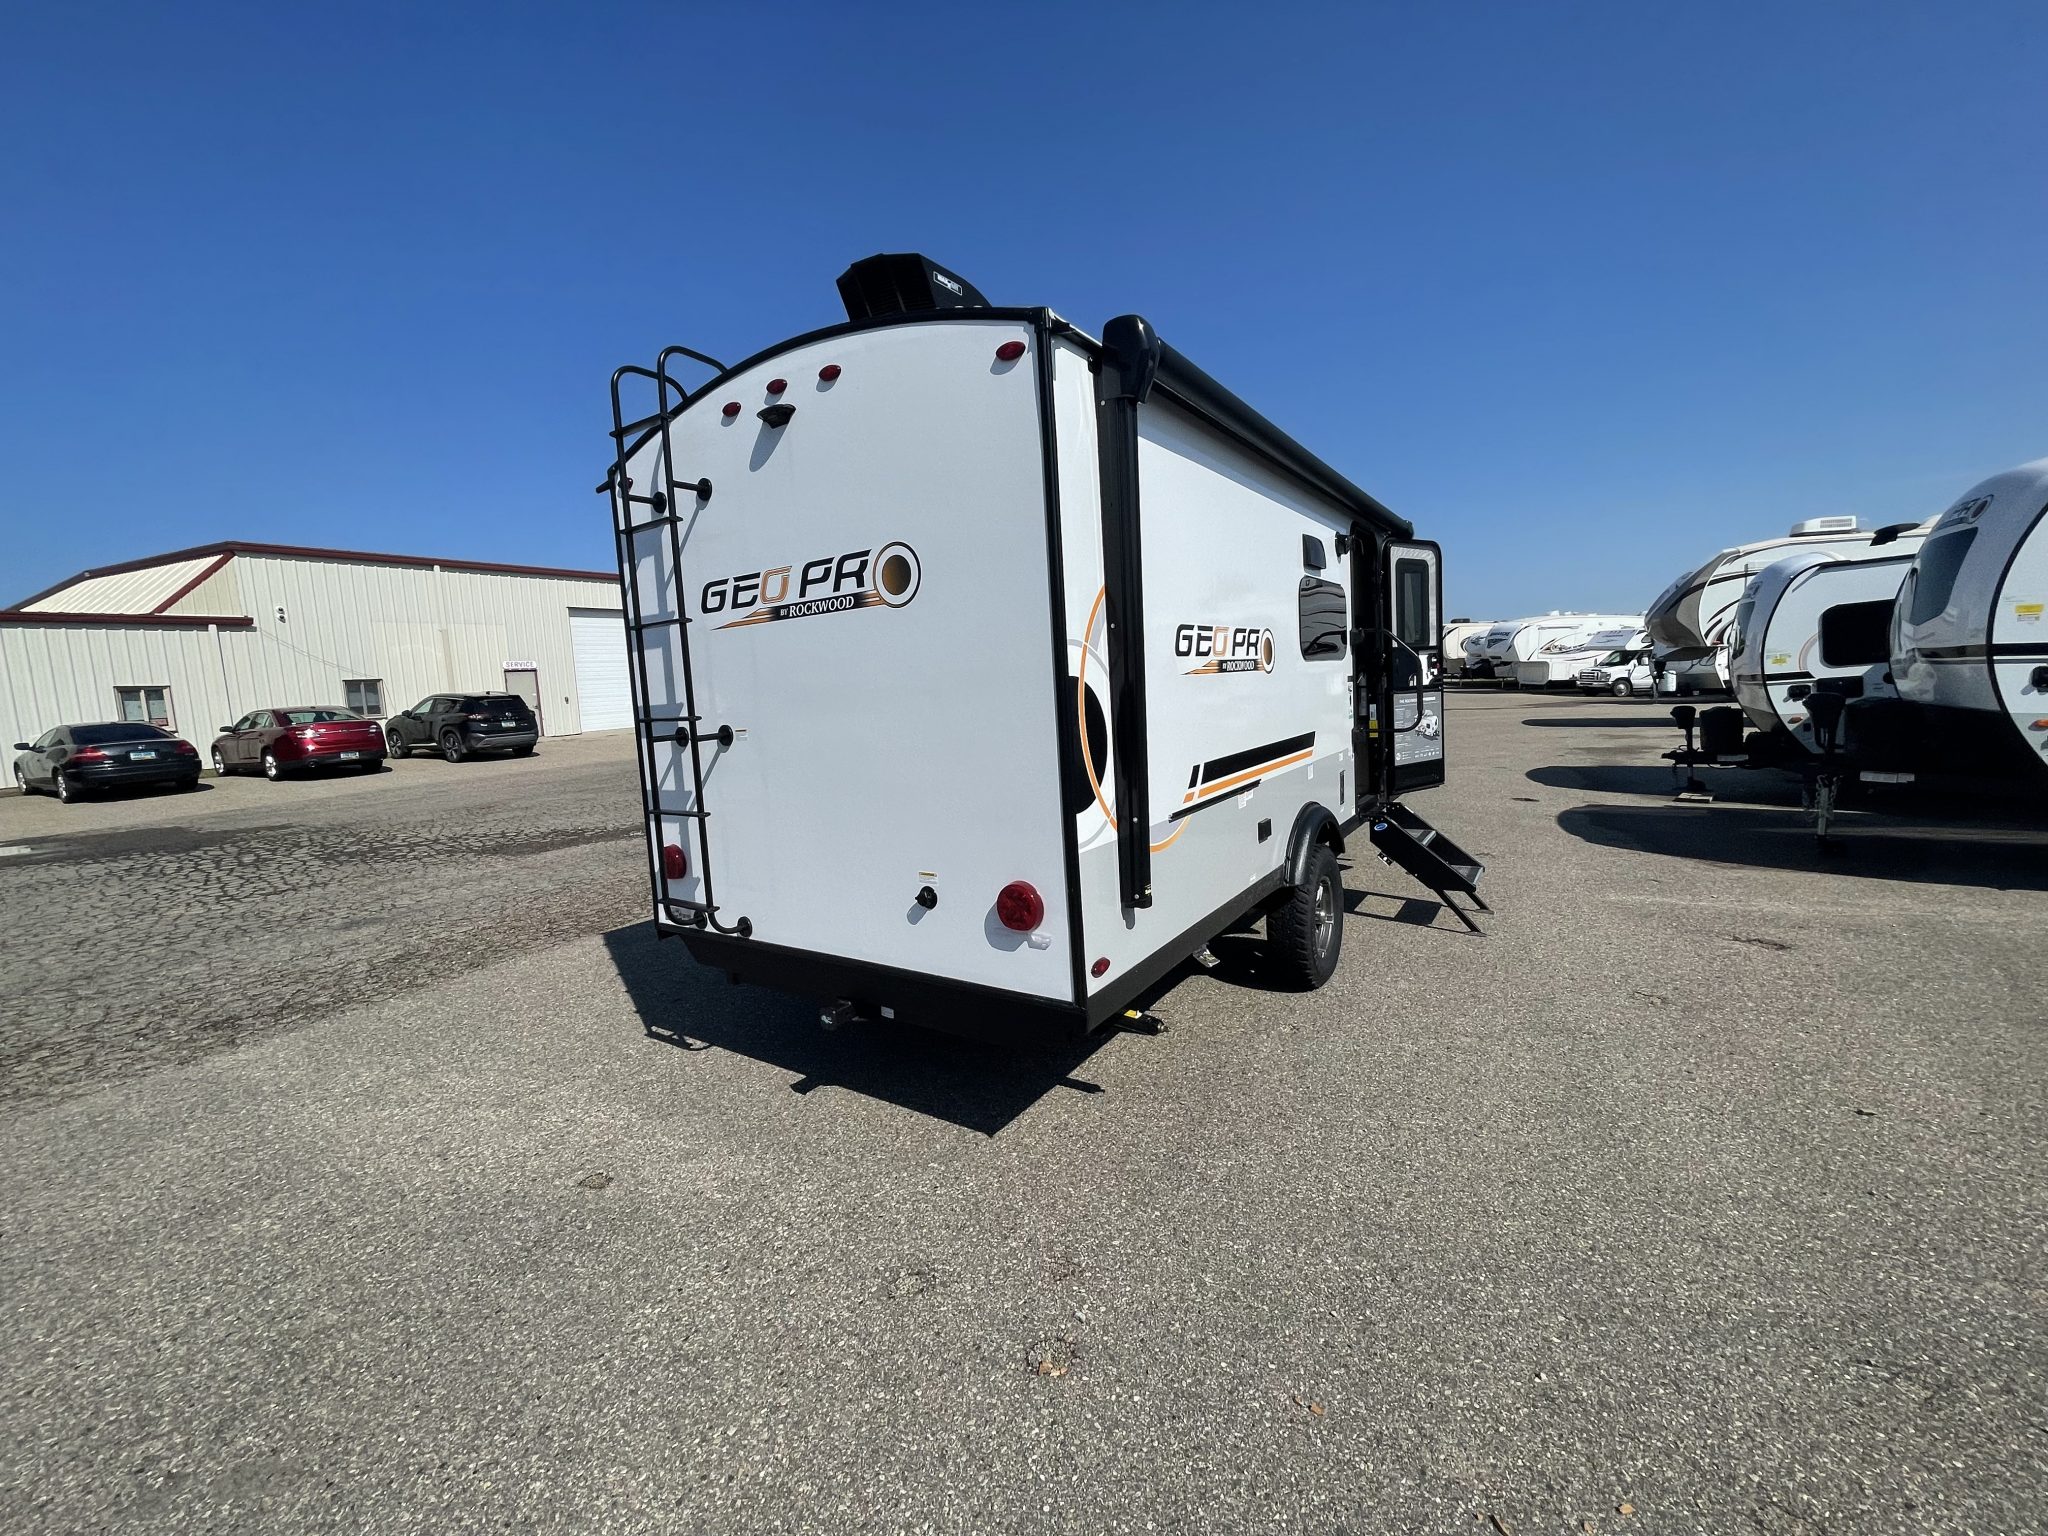 2023 Rockwood Geo Pro 20BHS with 1 slide out, bunks! Swenson RV & Marine